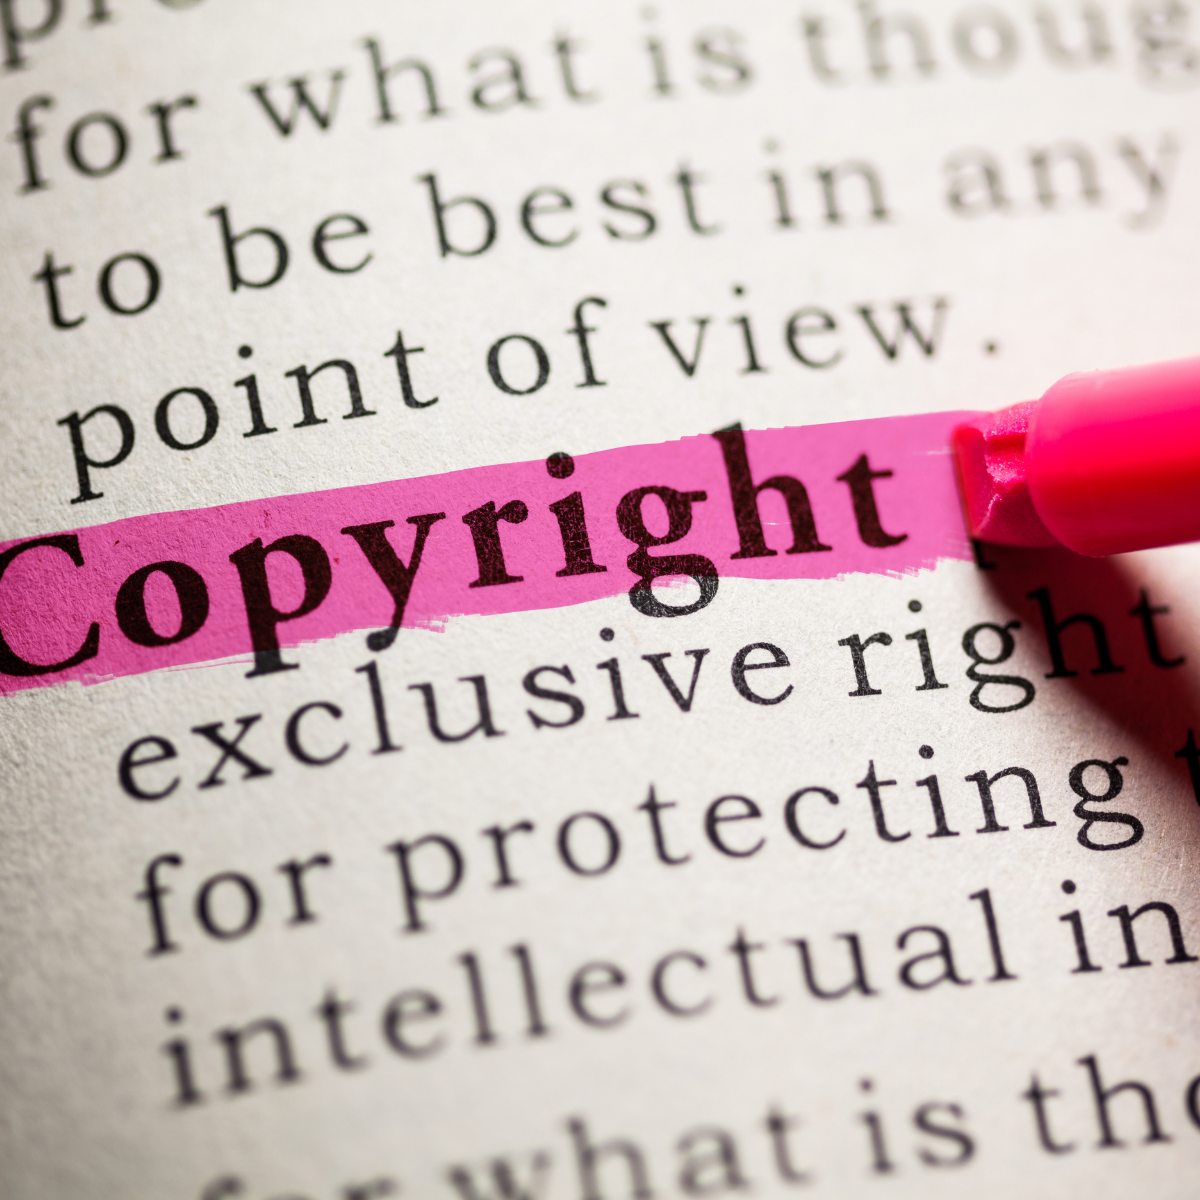 What's In A Name? Copyright and Trademark Infringement Risks for Interscholastic Athletics 